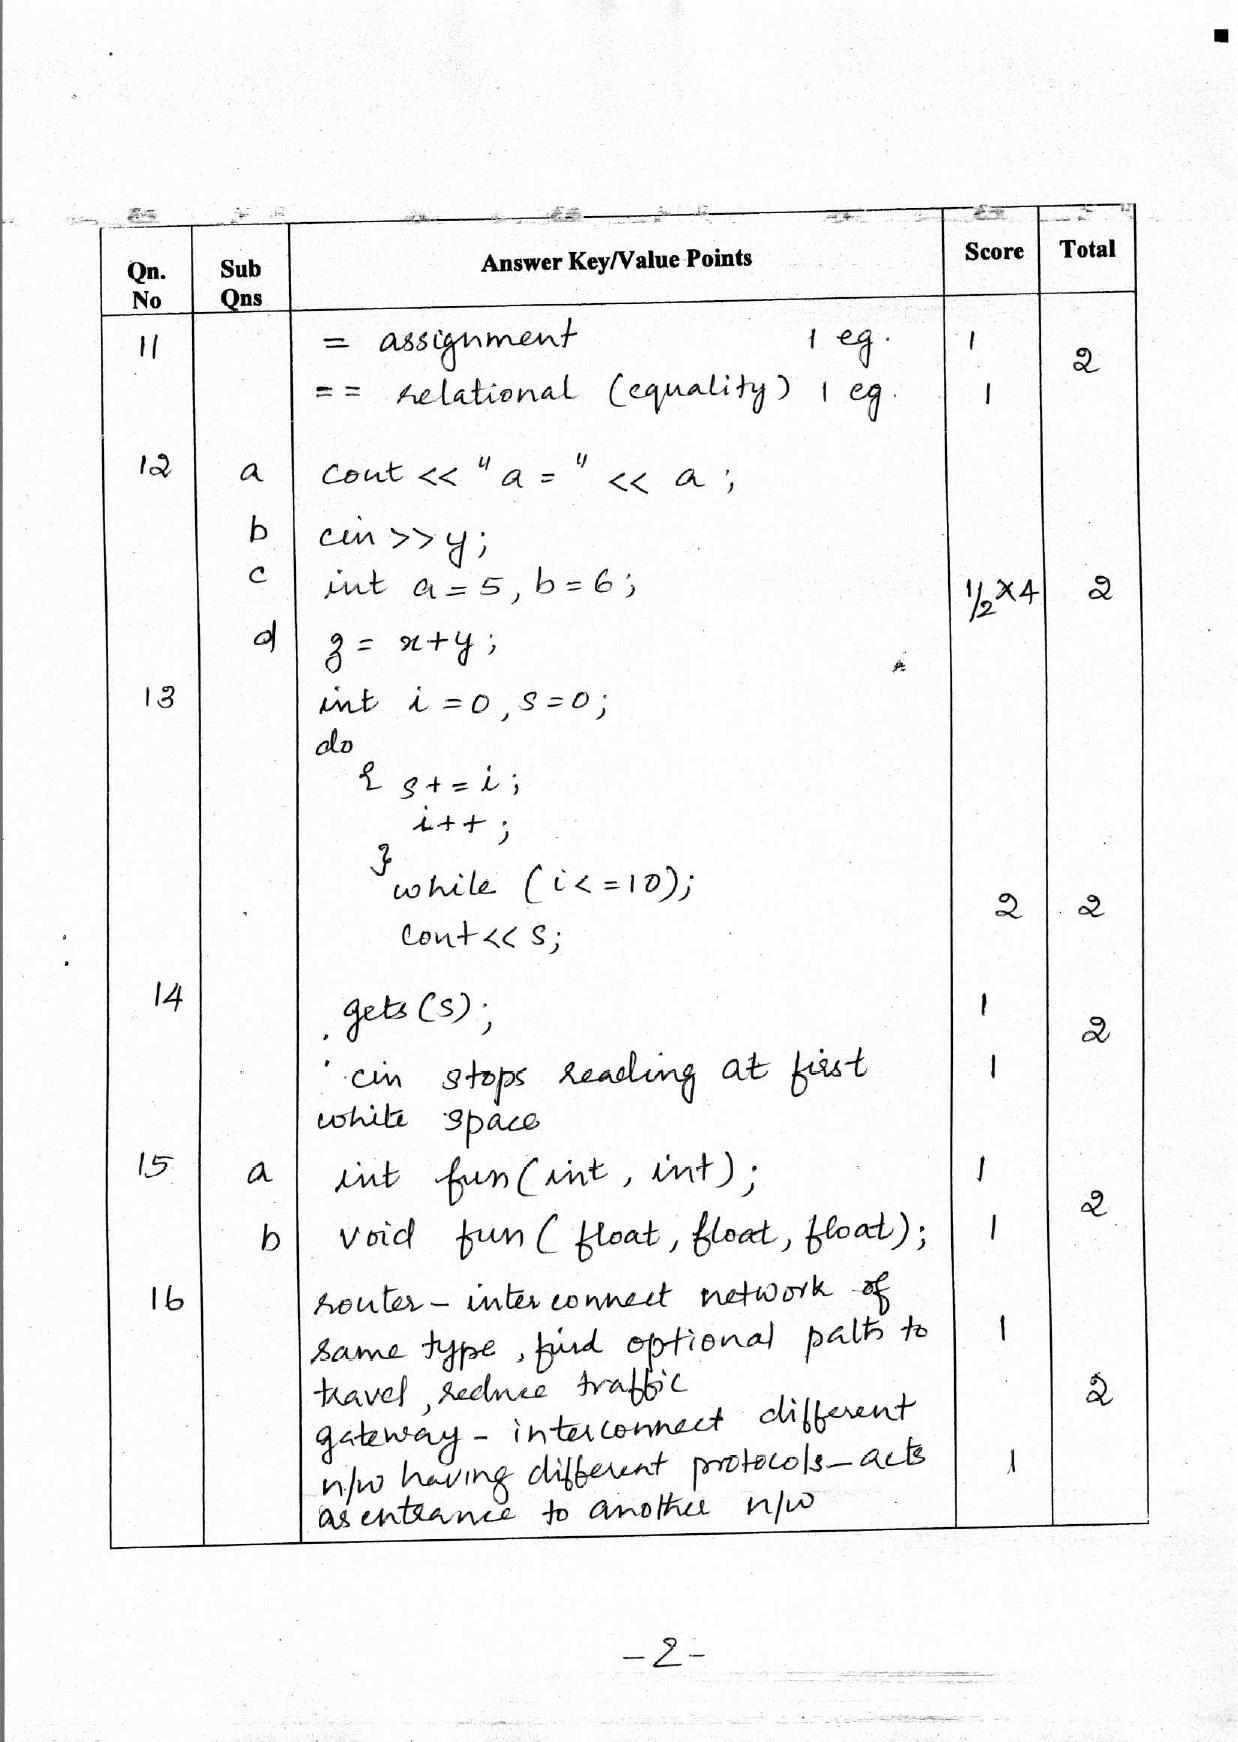 Kerala Plus One 2018 Computer Science and IT Answer Key - Page 2